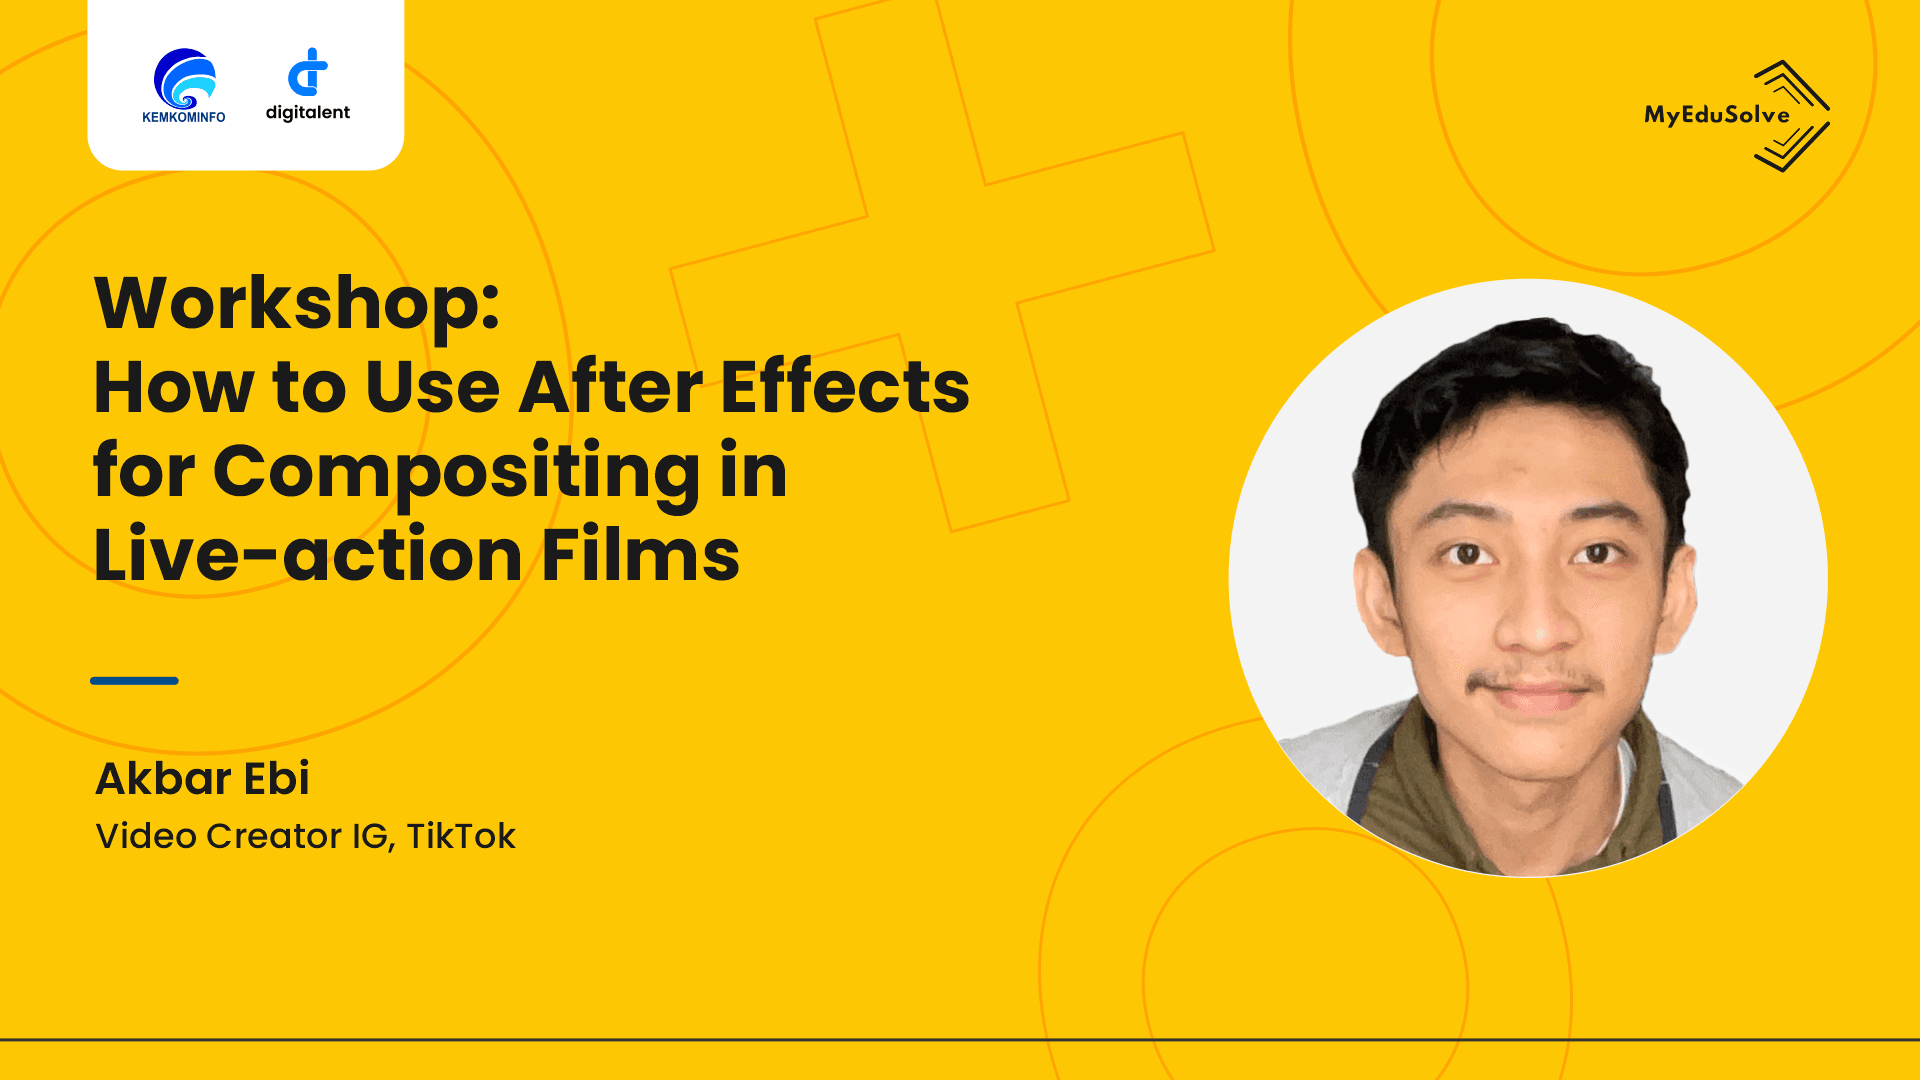 How to Use After Effects for Compositing in Live-action Films